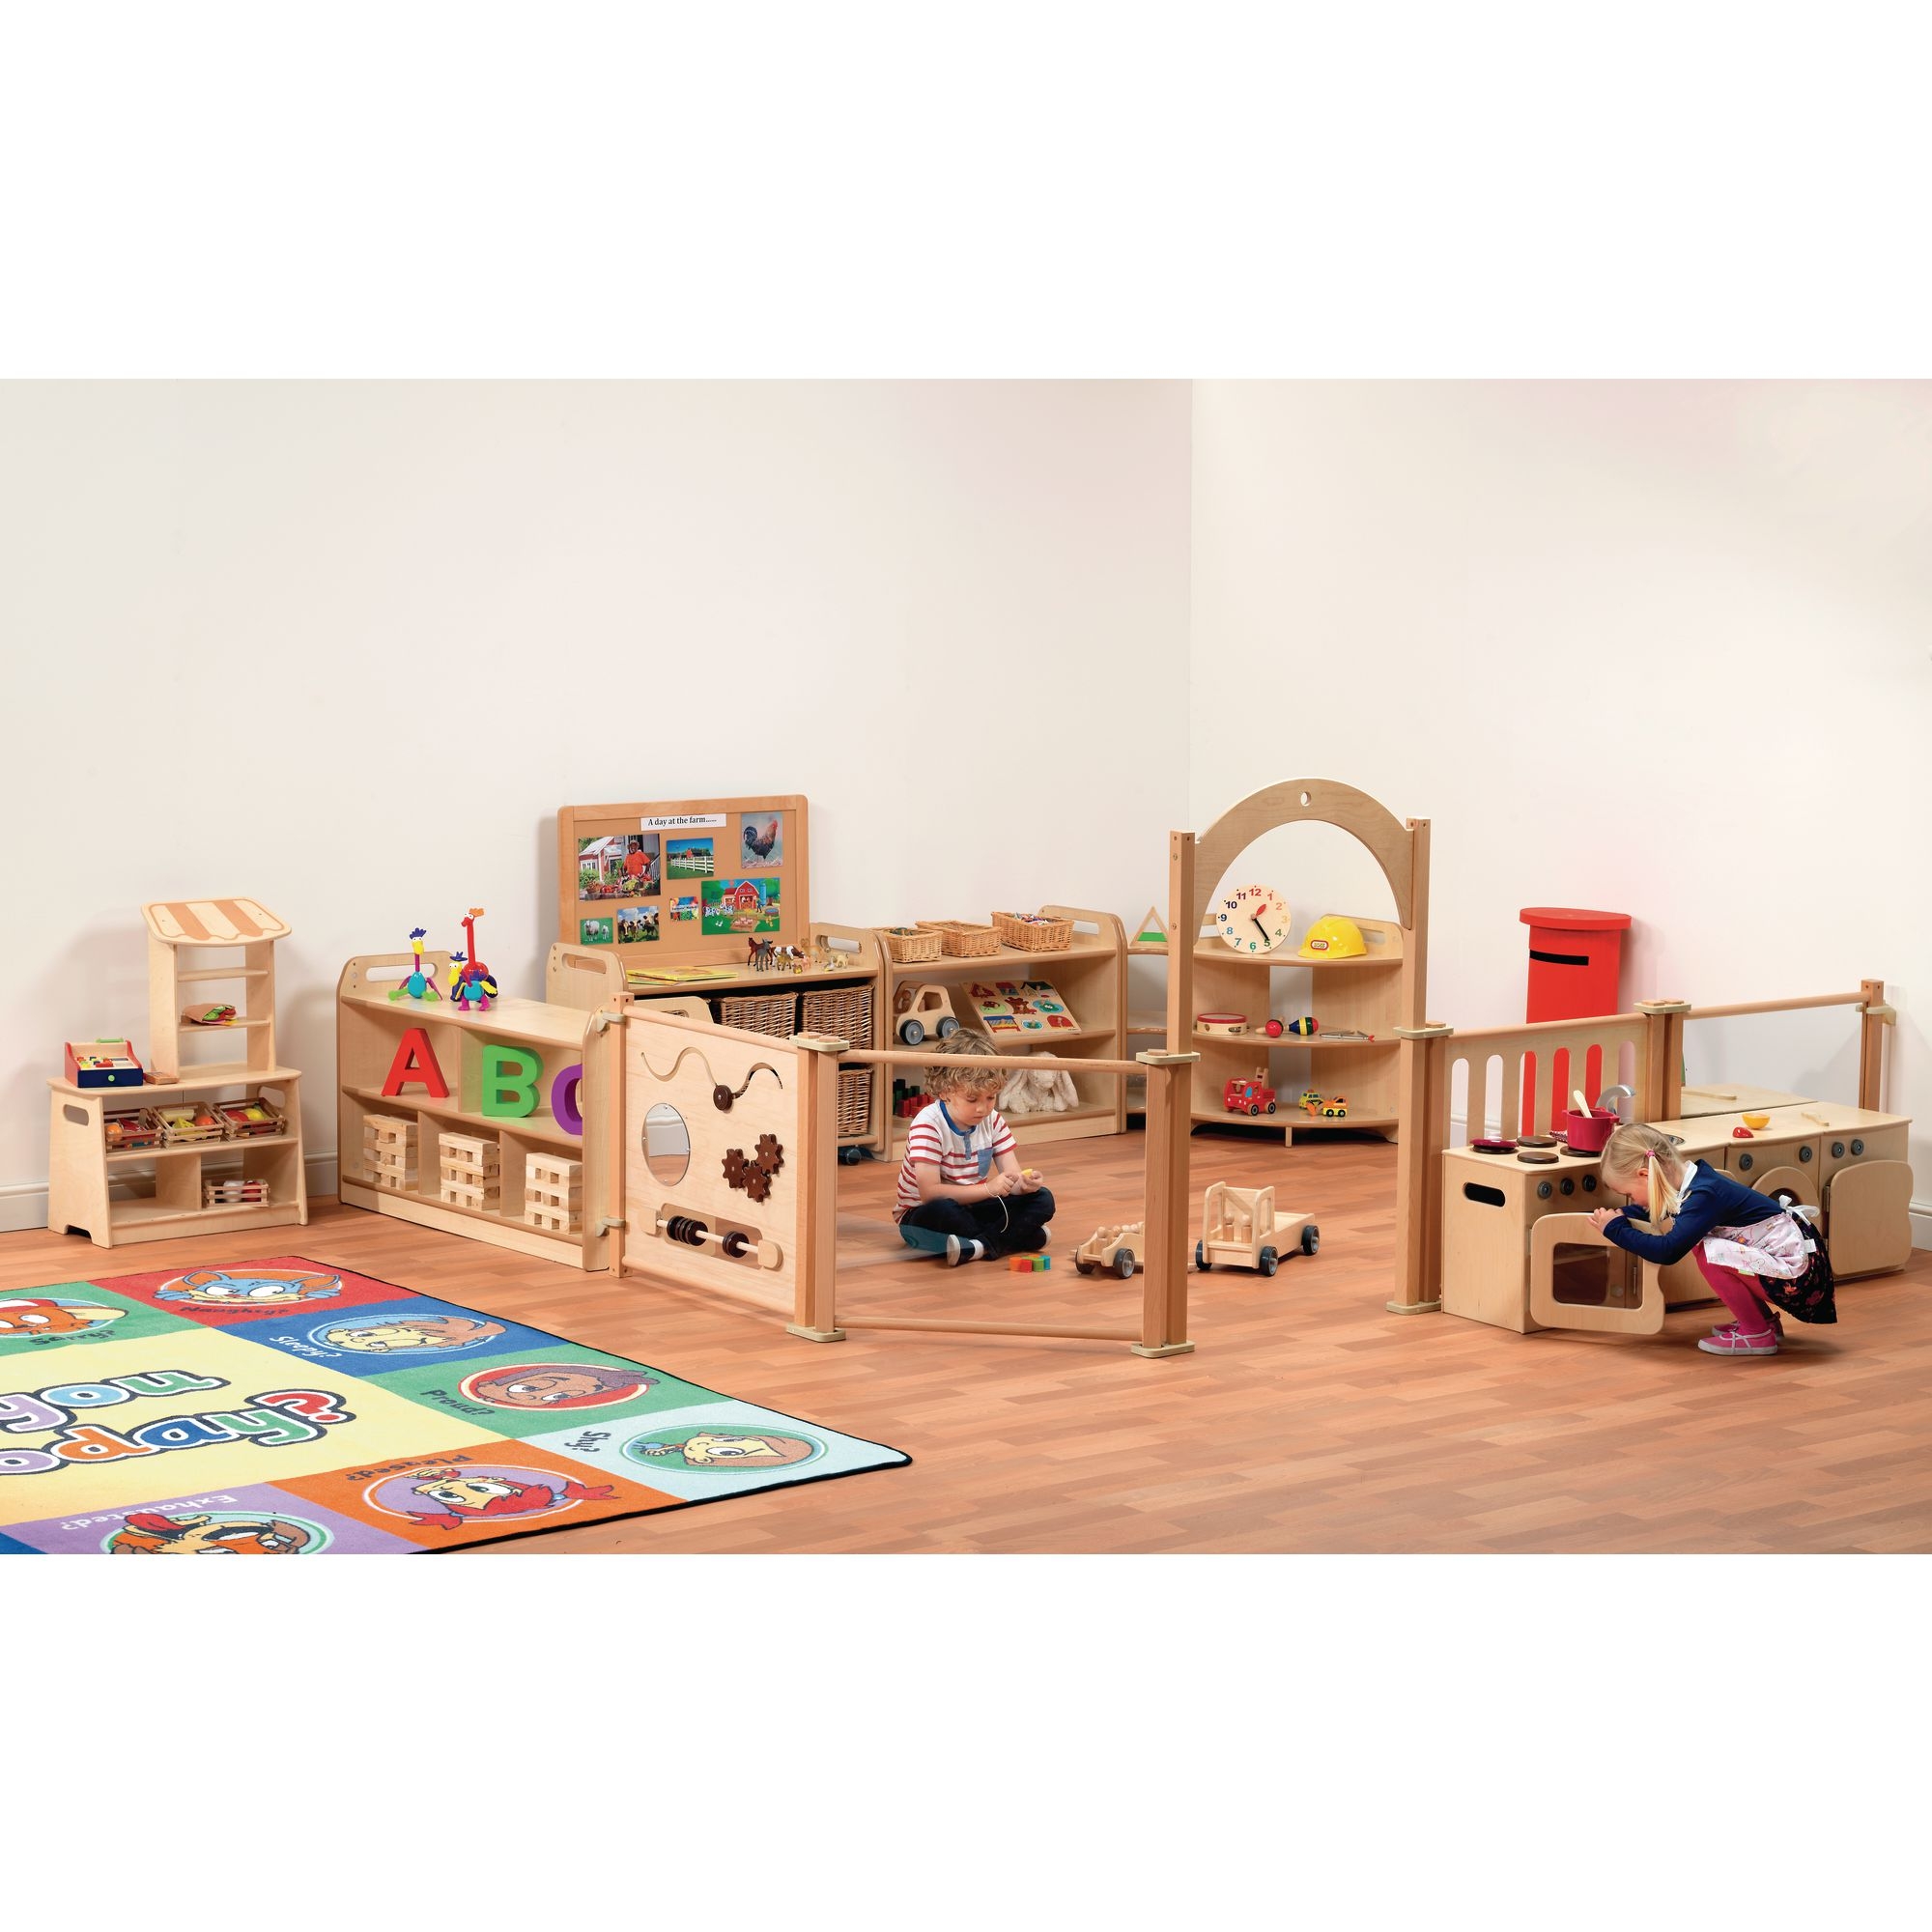 Playscapes Playscapes Imagination Zone Wicker